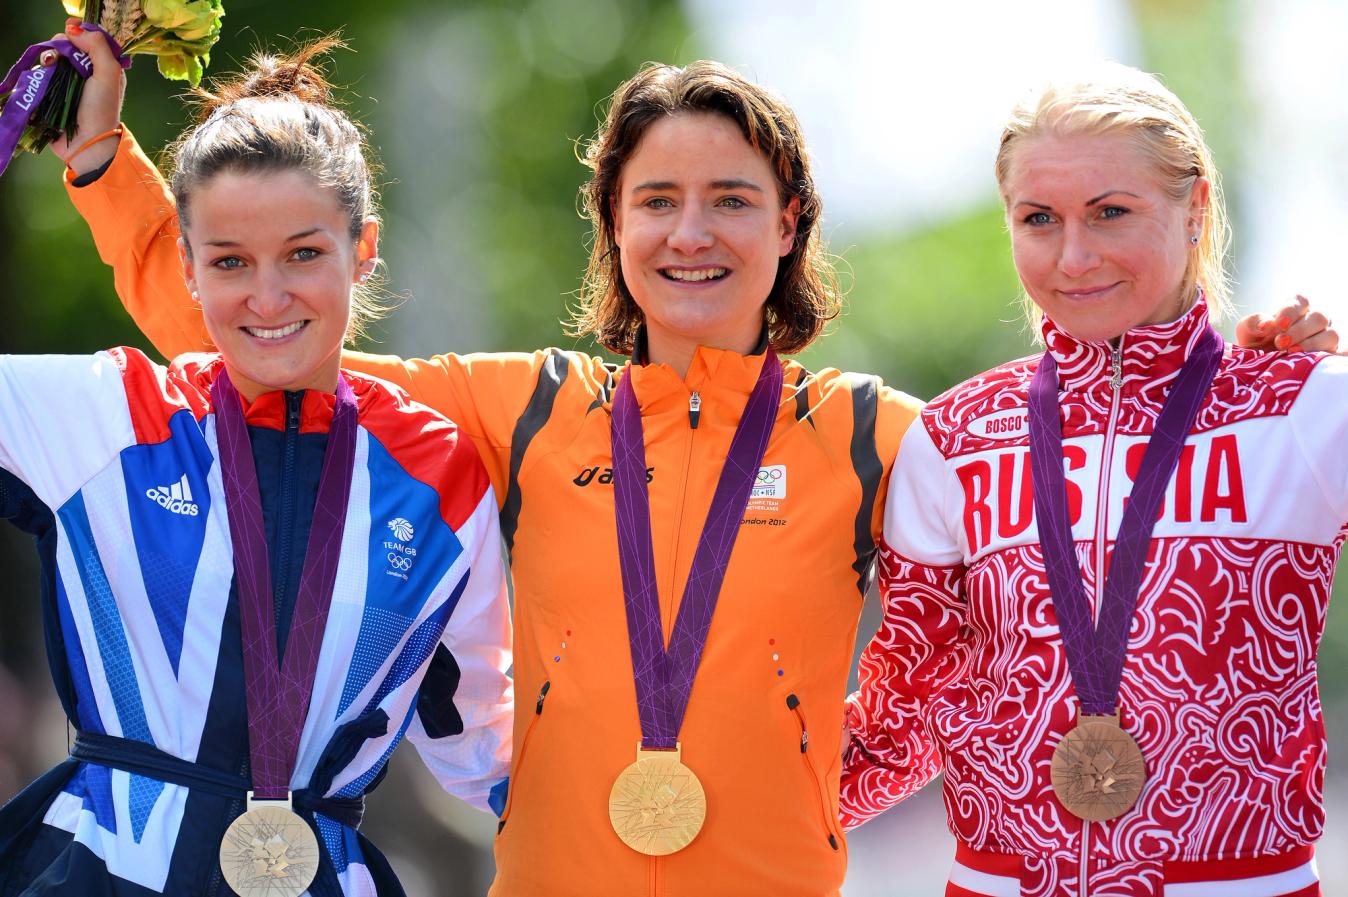 Lizzie Deignan - then Armitstead - with the silver medal (left) after the London 2012 Olympic road race